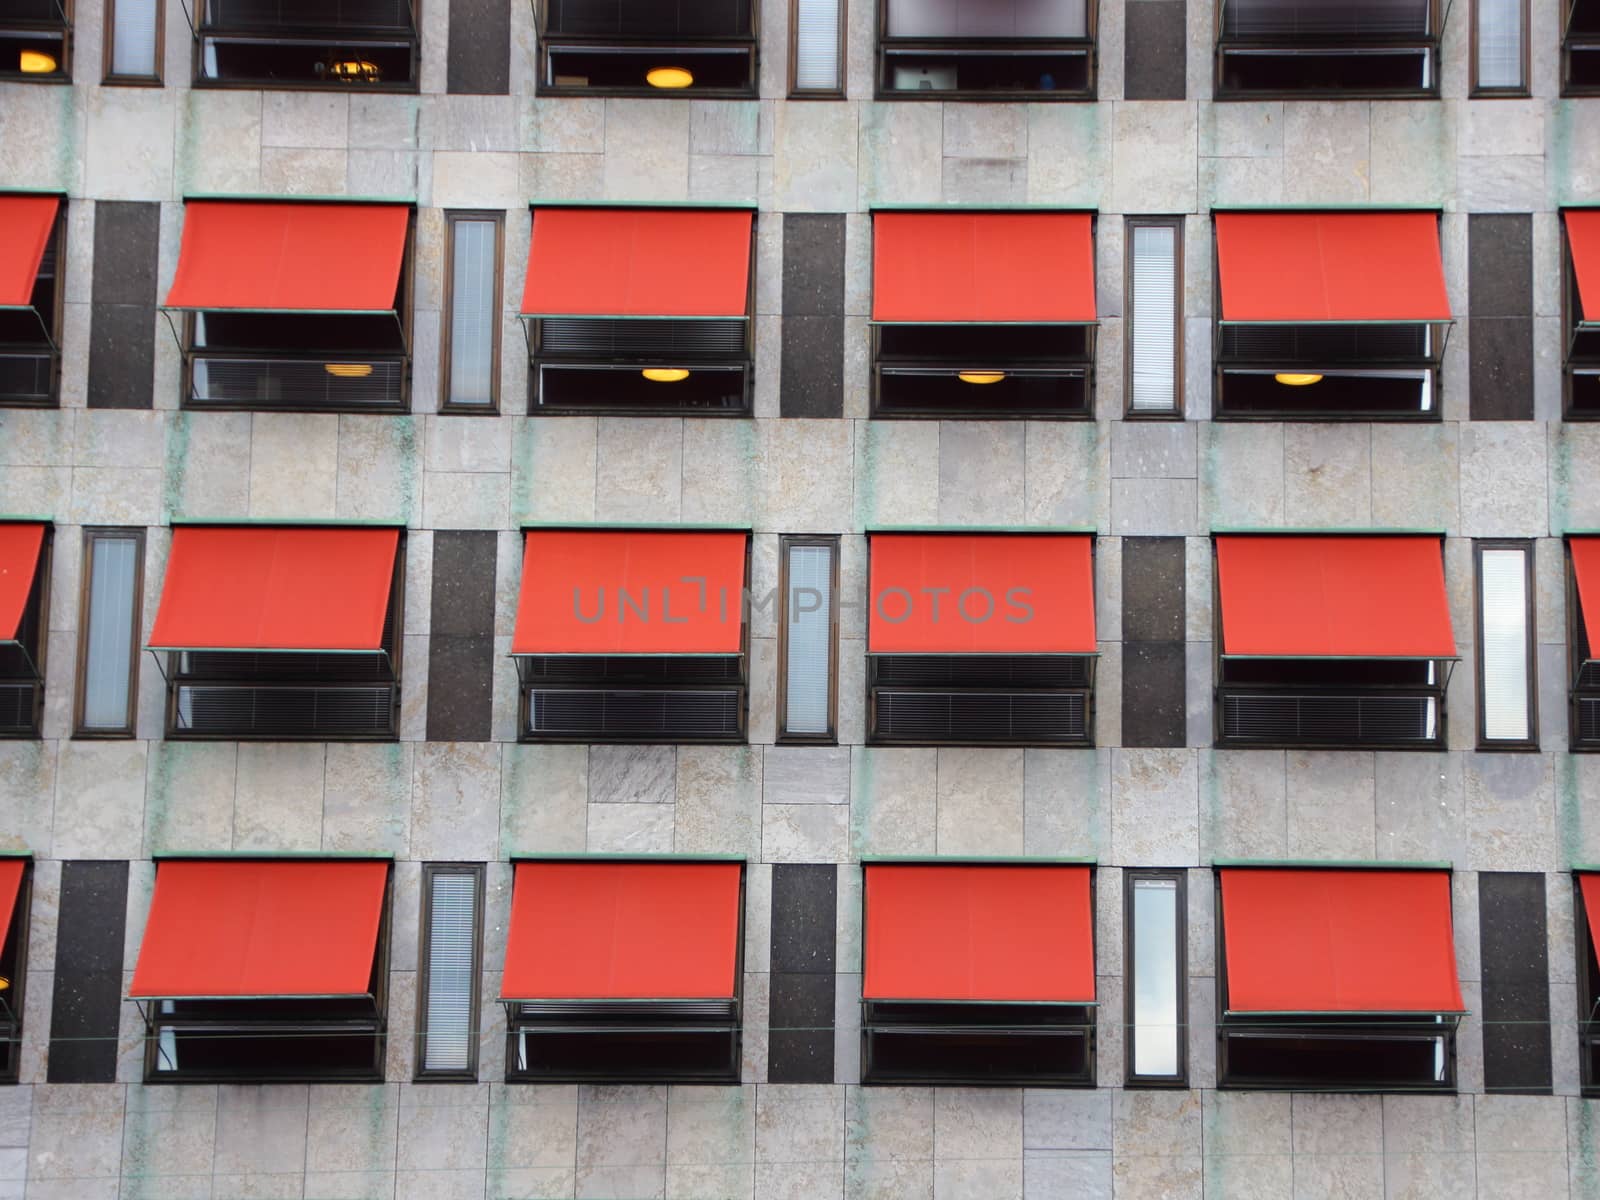 Twelve Red Overhang Sunshades on Modern Building Facade Protecting from the Sun